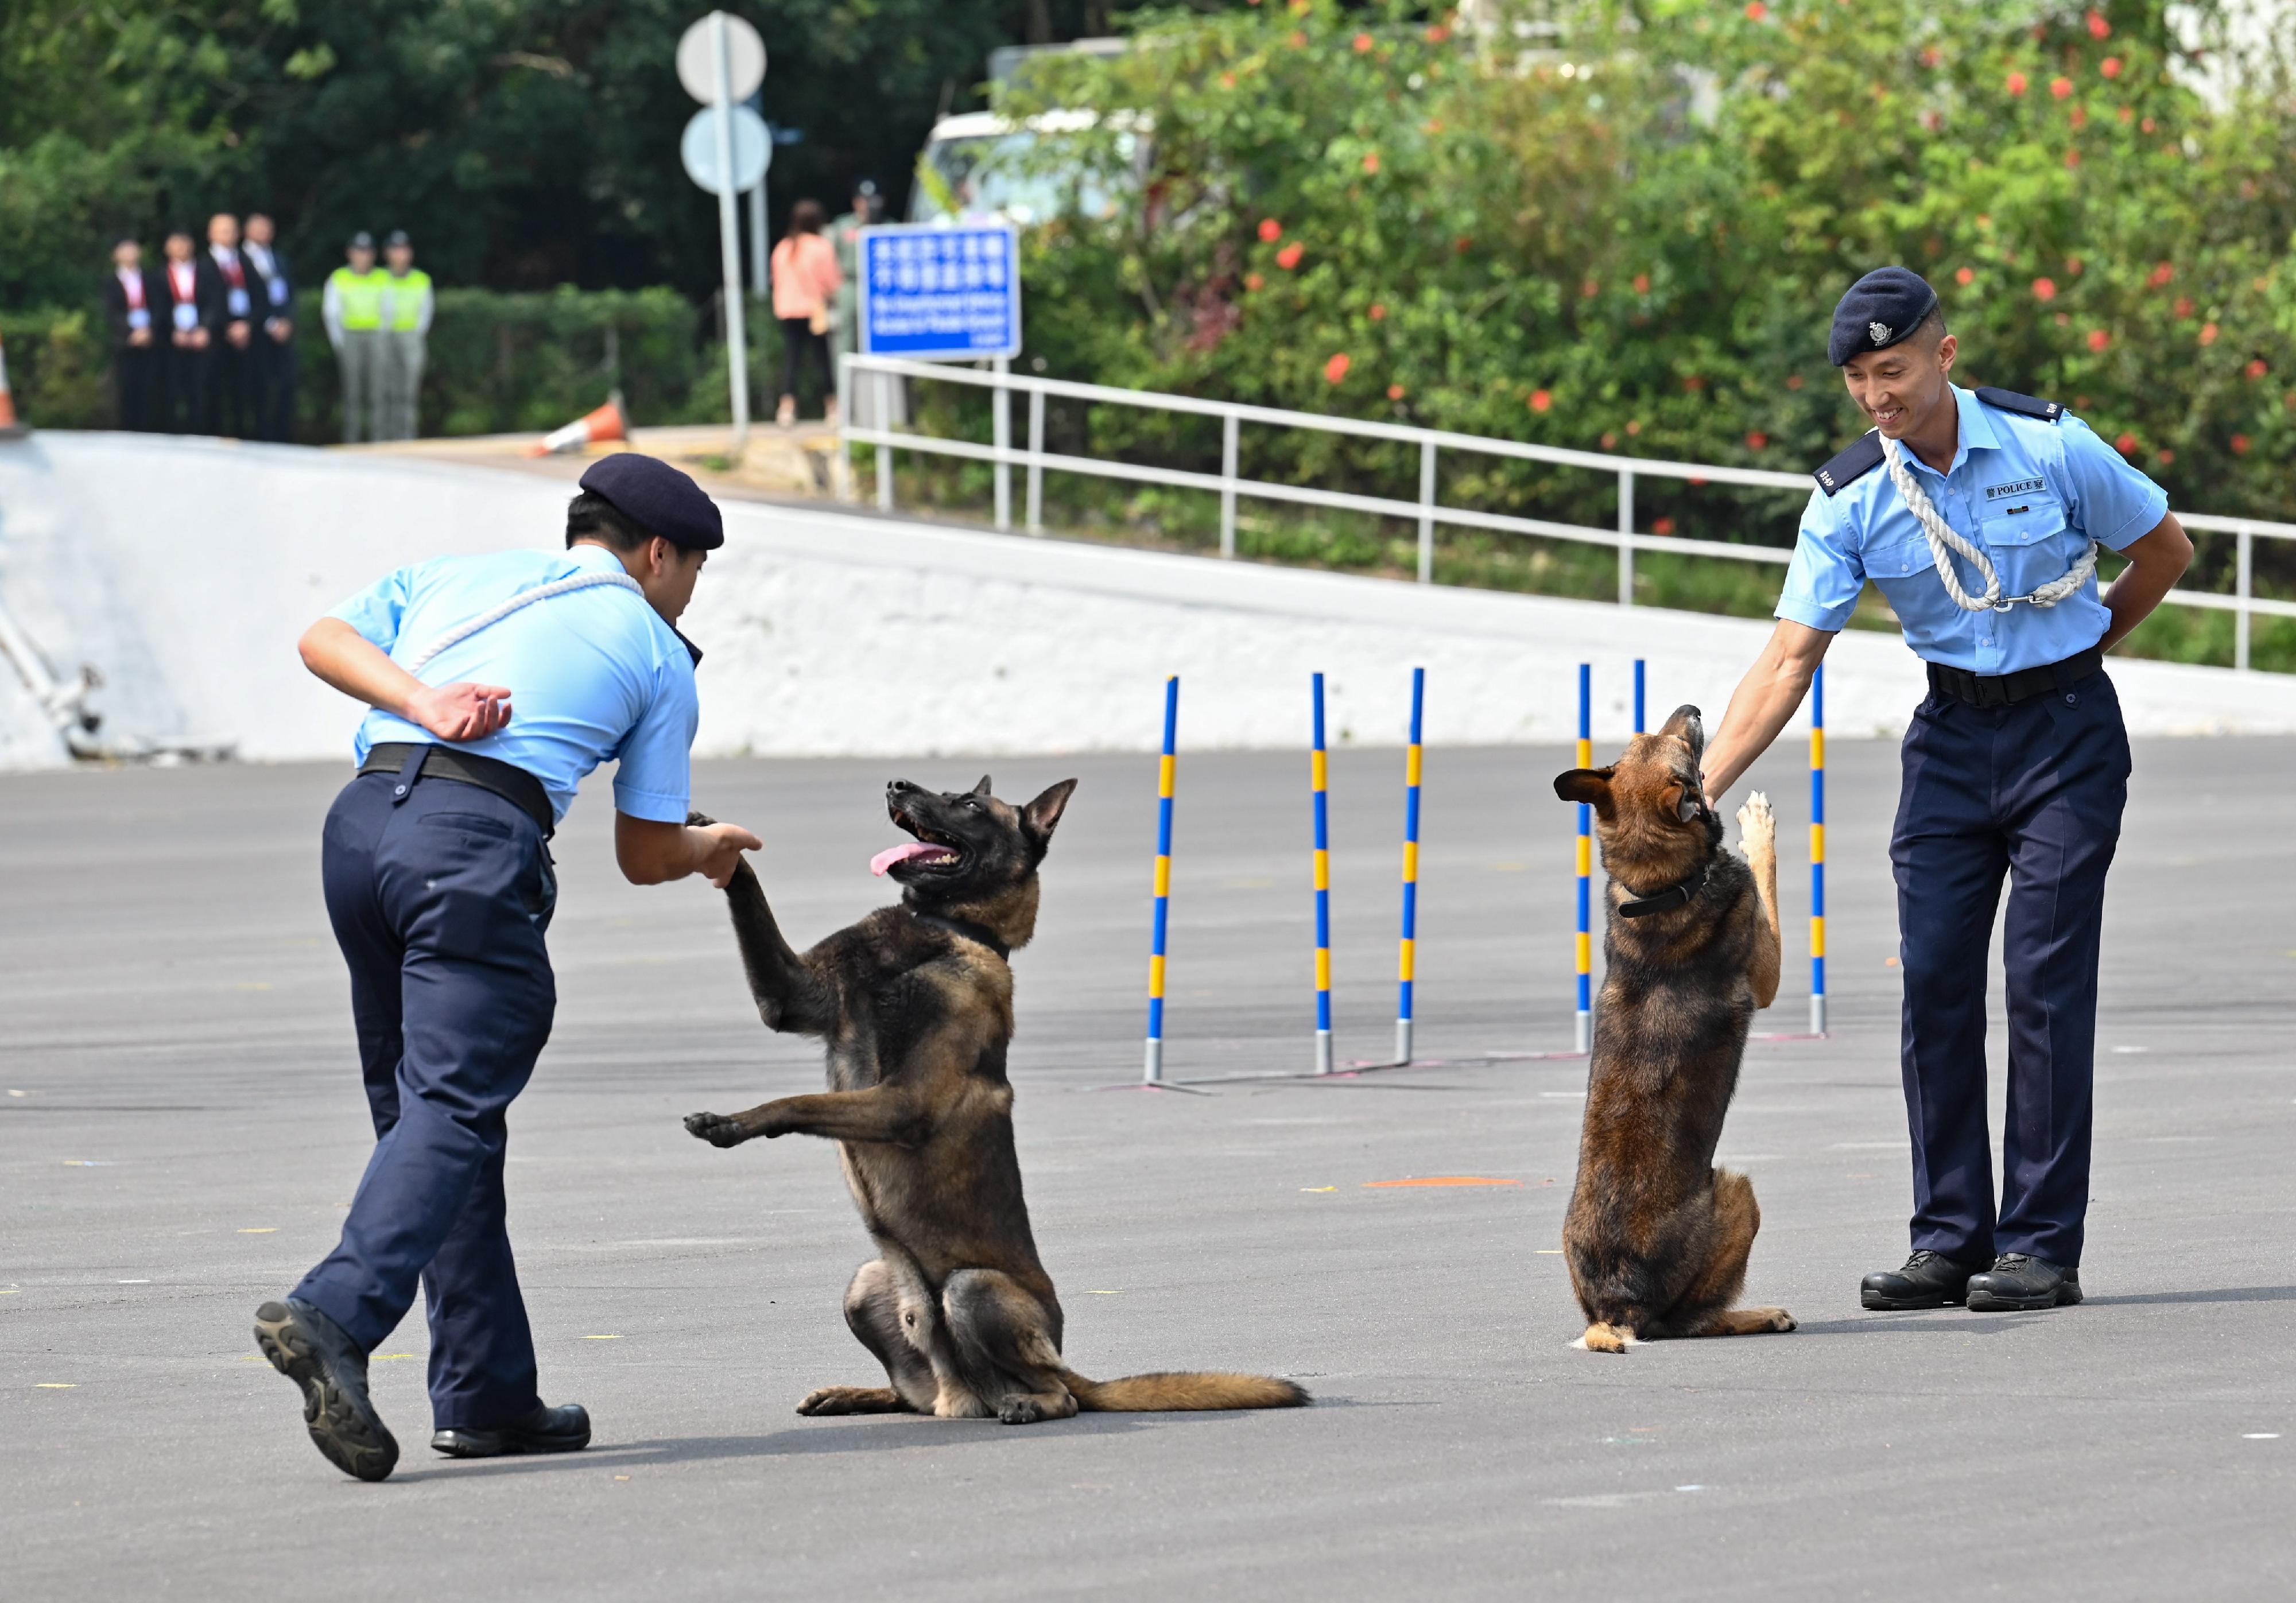 The Police Force held an open day in support of the National Security Education Day at Hong Kong Police College today (April 15). Photo shows a performance of the Police Dog Unit in the grand show.
